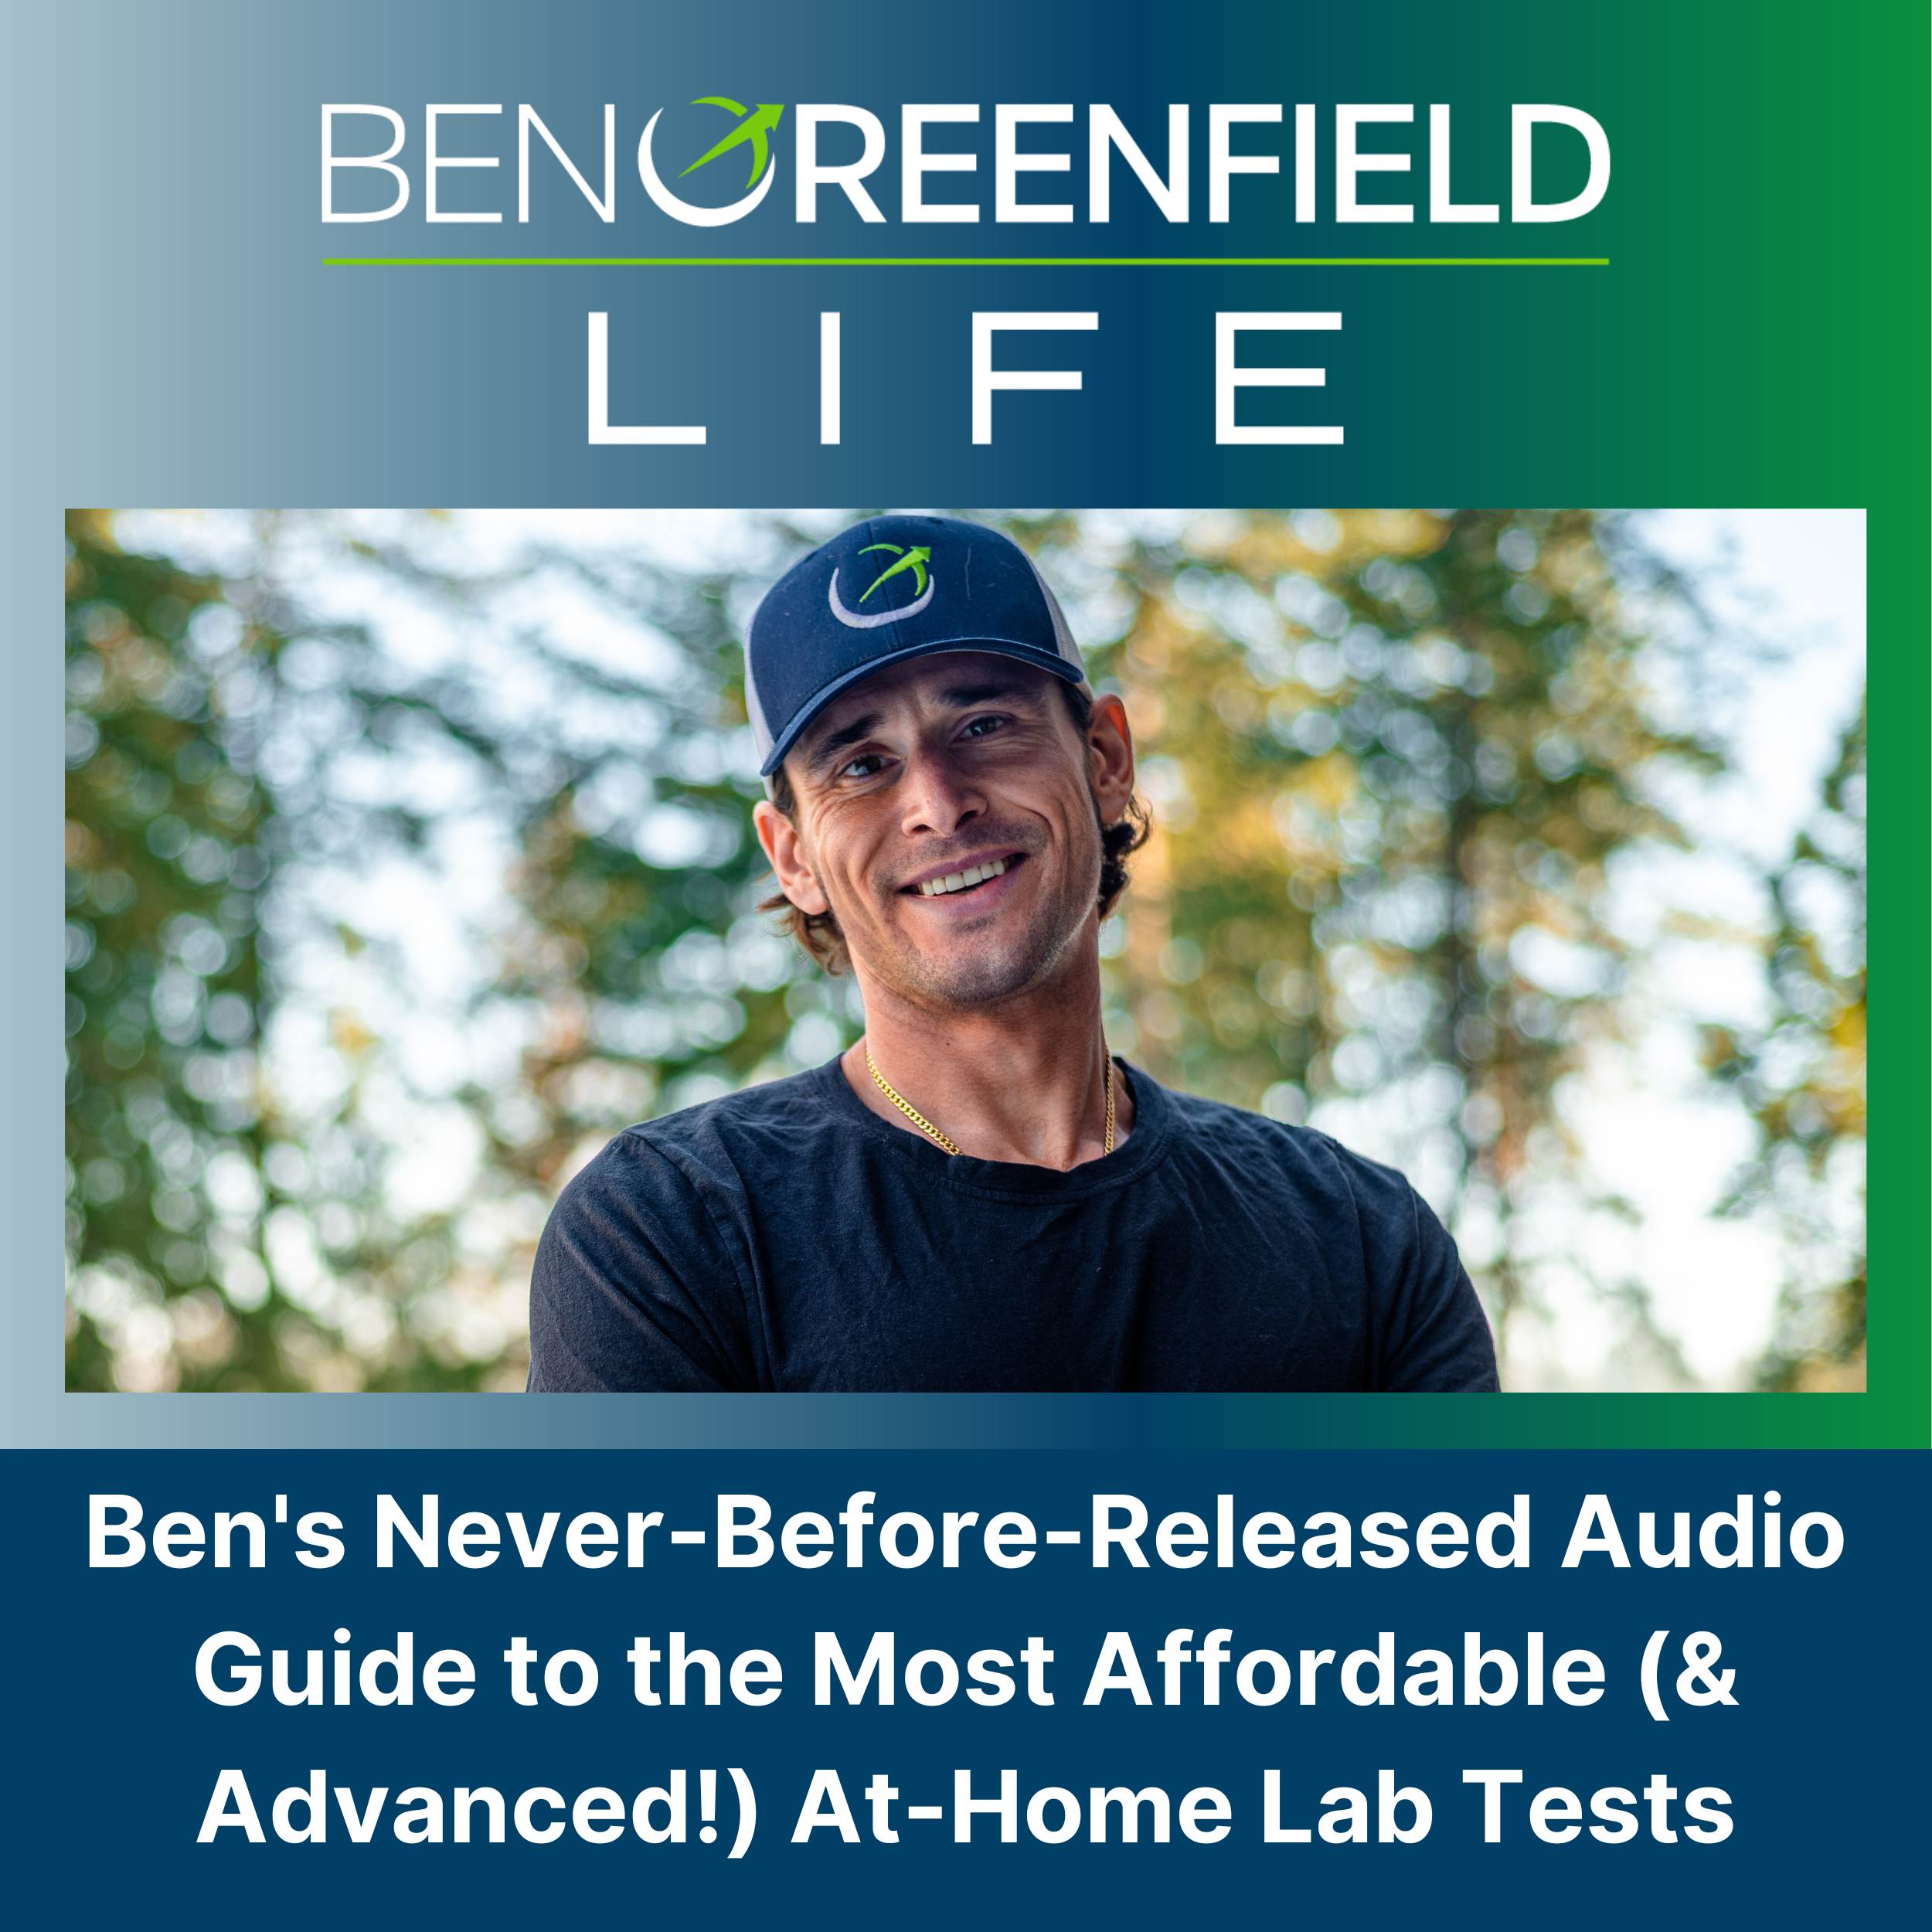 Ben's Guide to the Most Affordable and Advanced At-Home Lab Tests, Learn How to Reach Peak Health & Performance Through Testing: Solosode 472